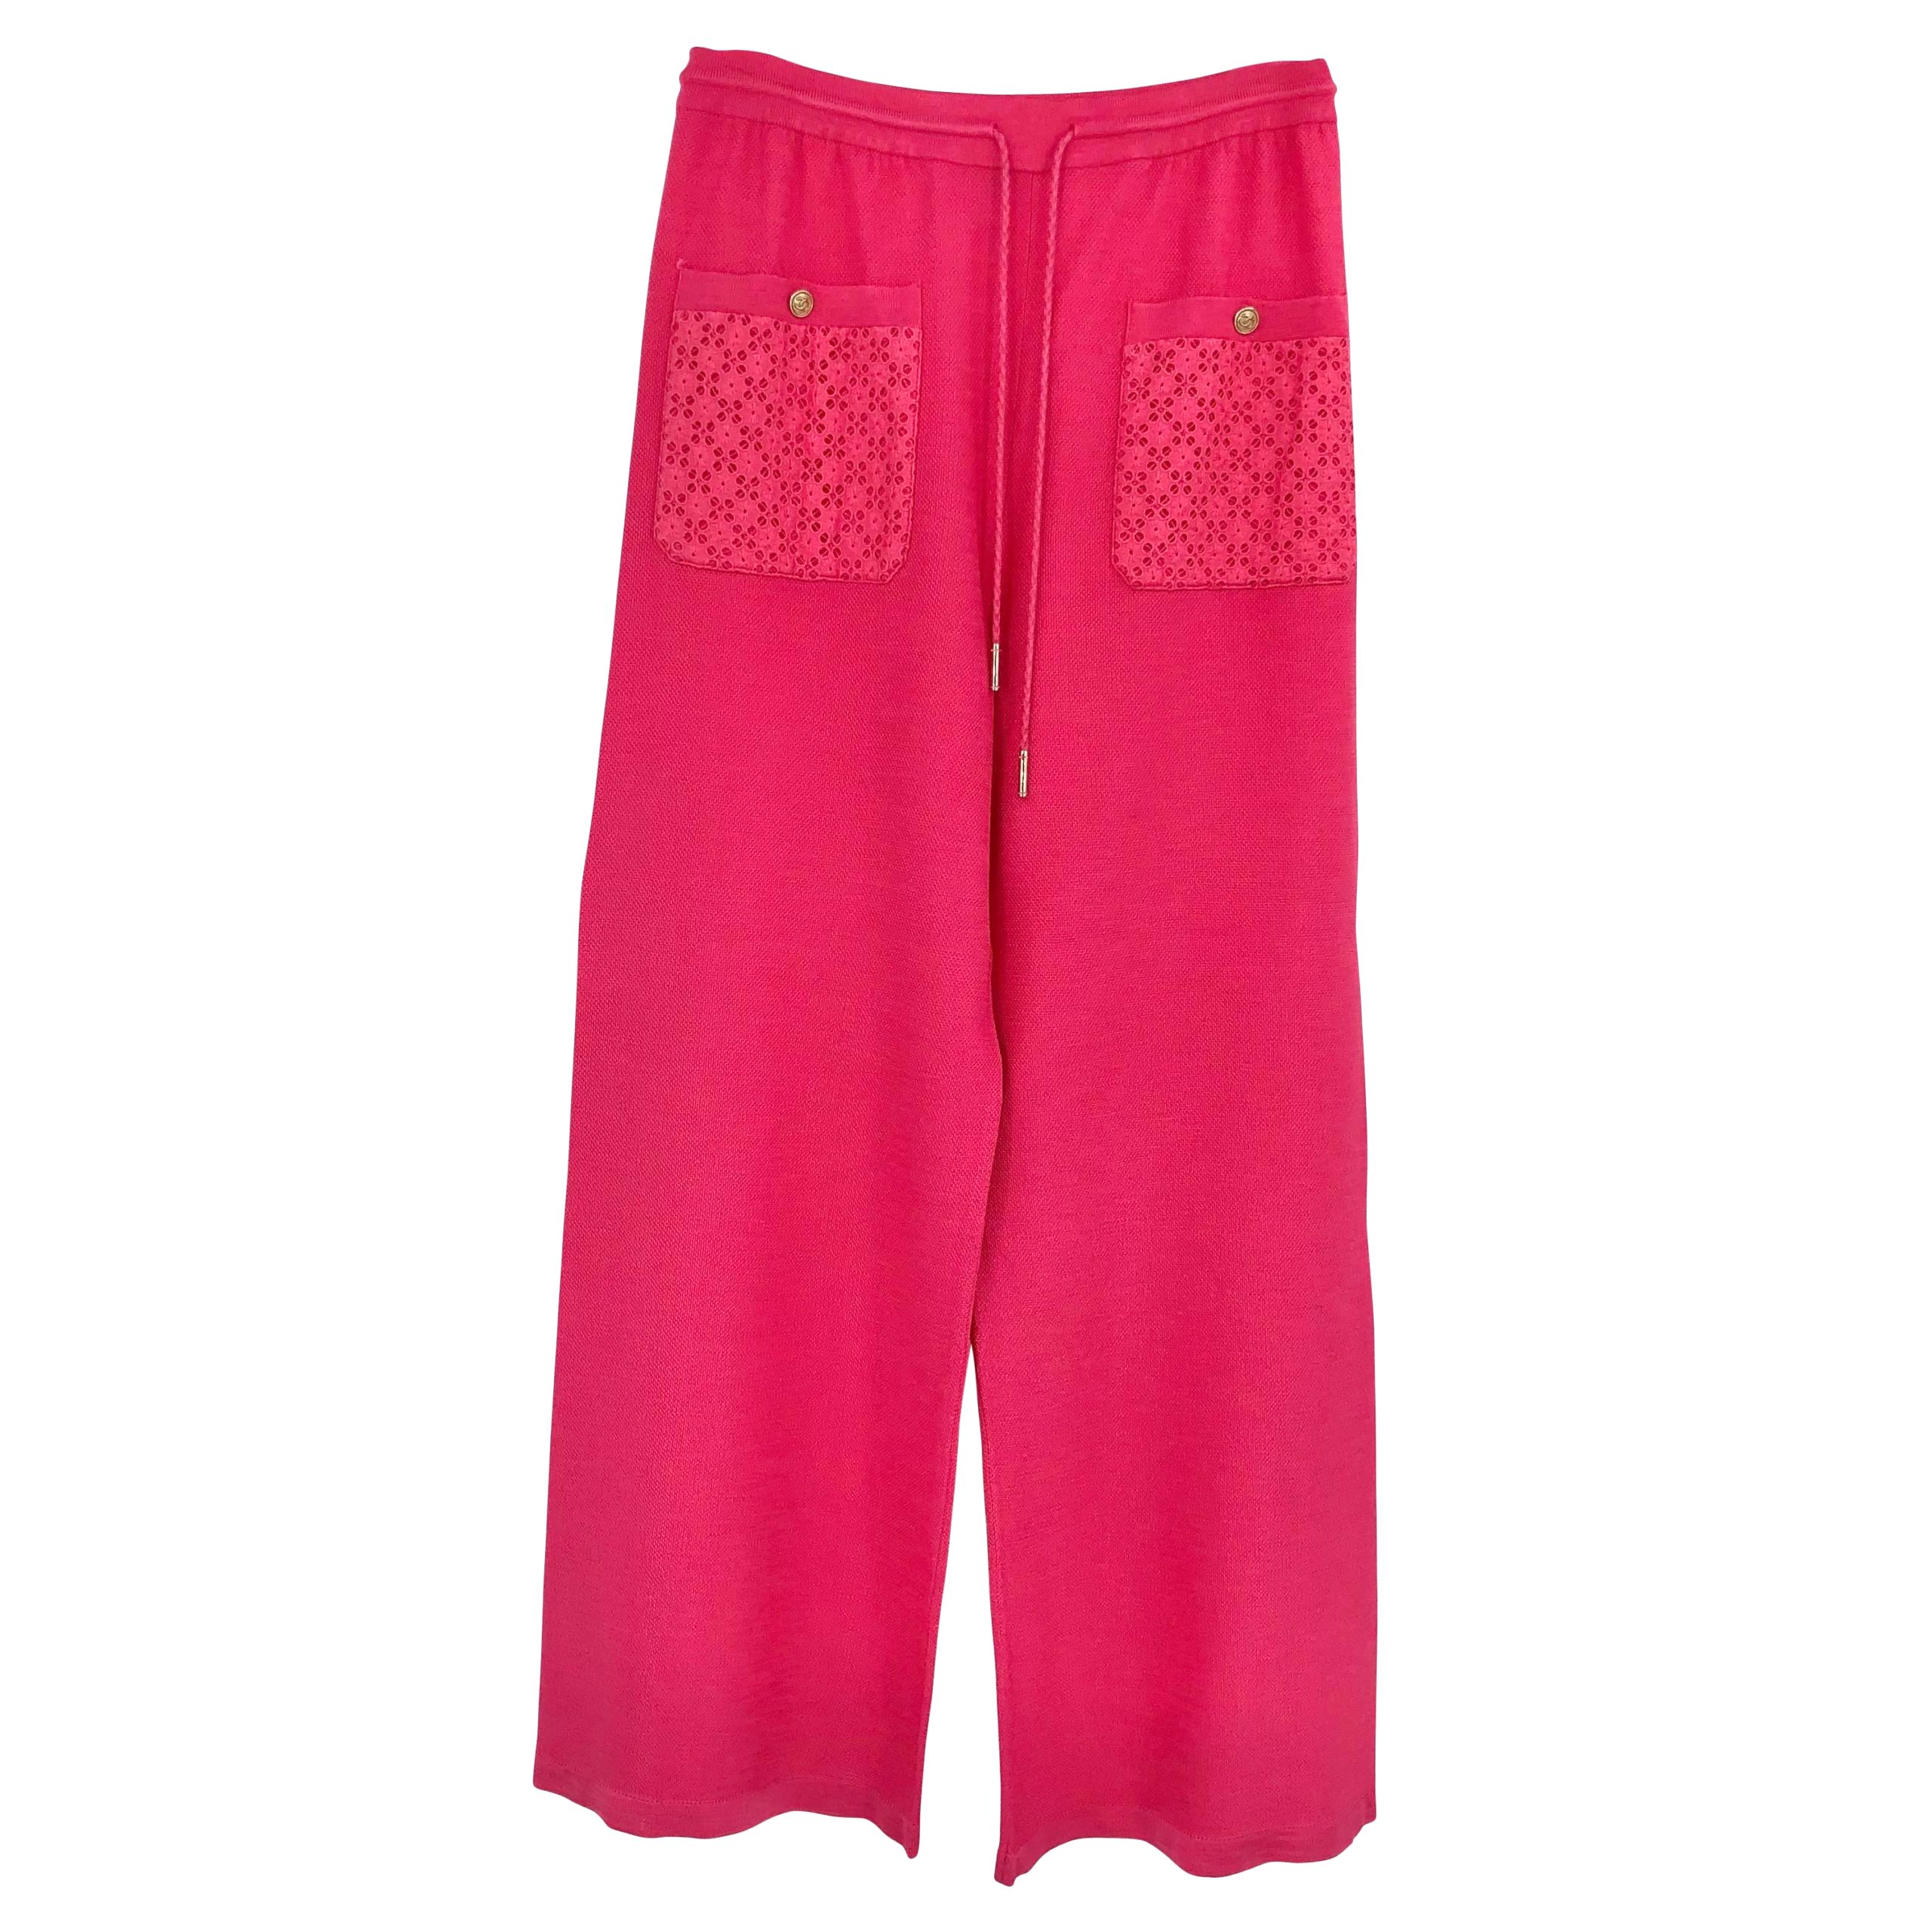 Chanel jogging pants in pink viscose knit blend with lace pockets